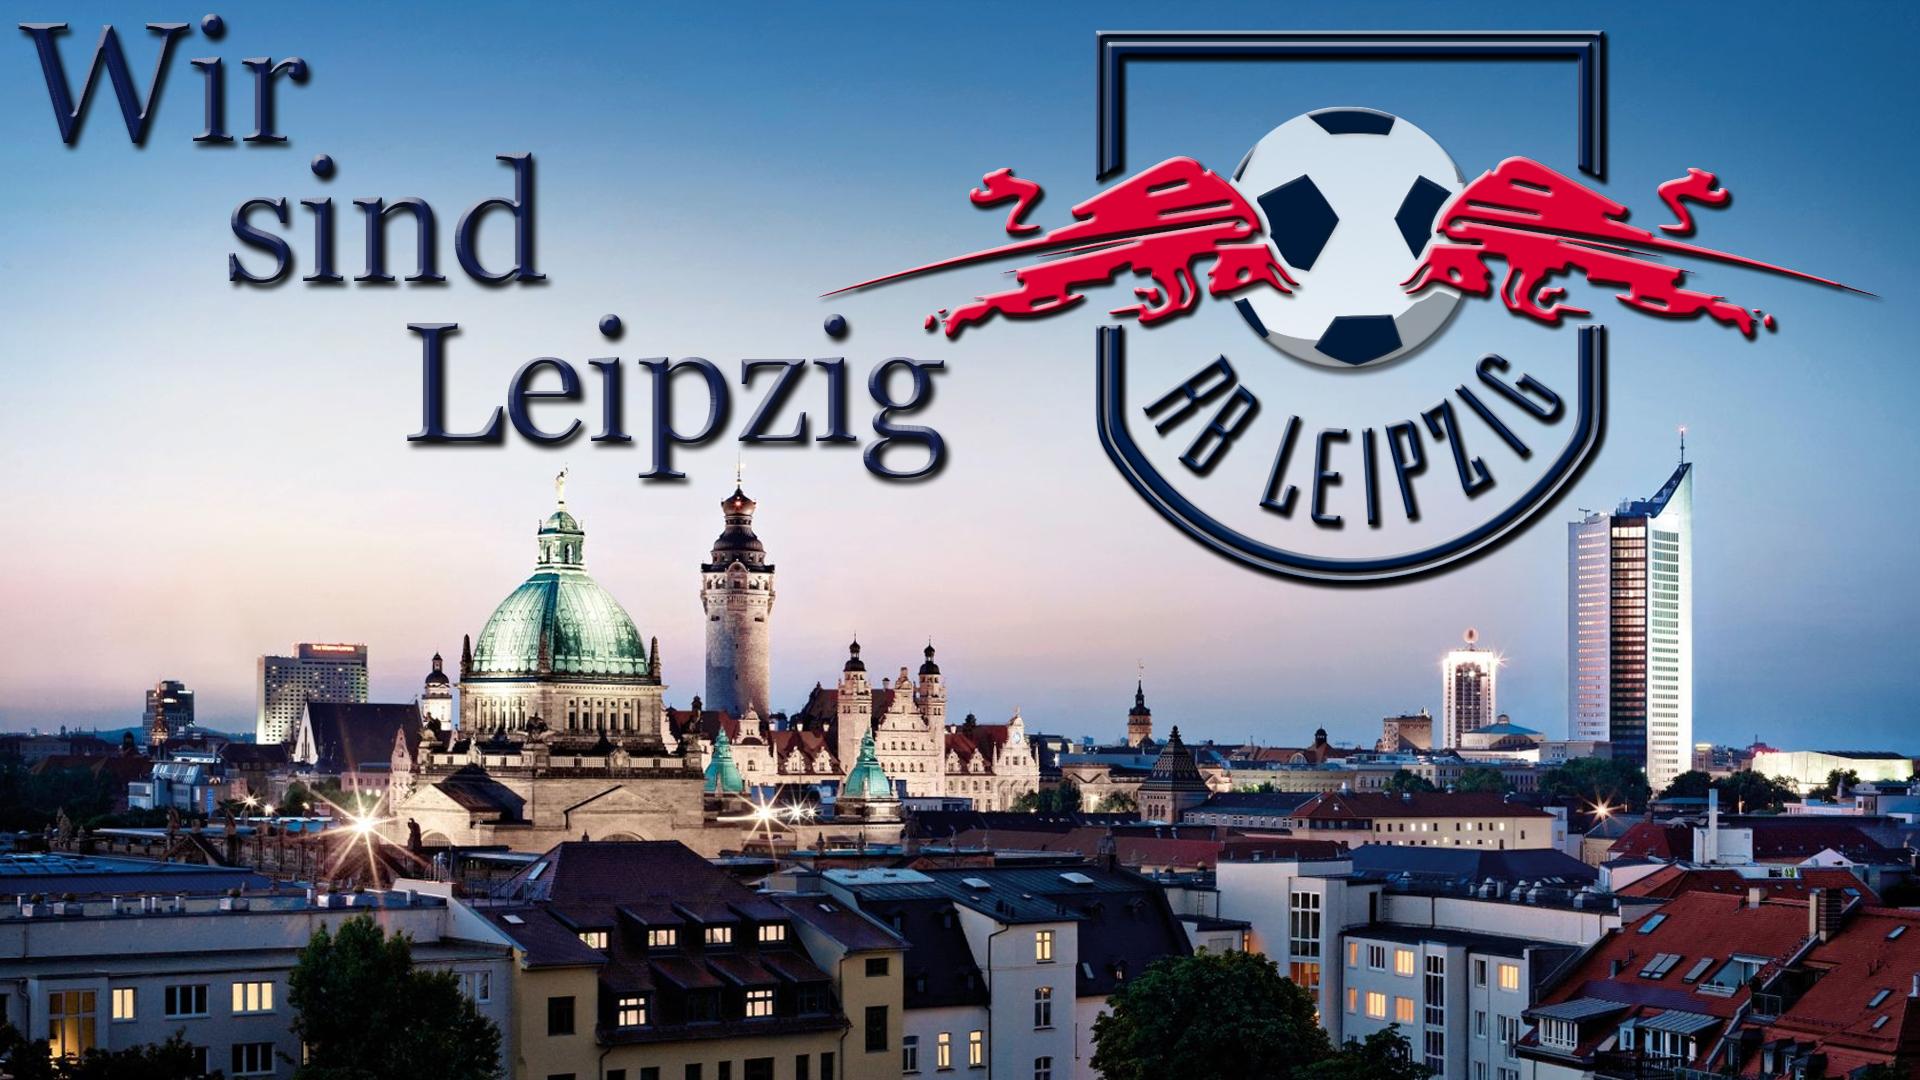 Rb Leipzig Wallpapers